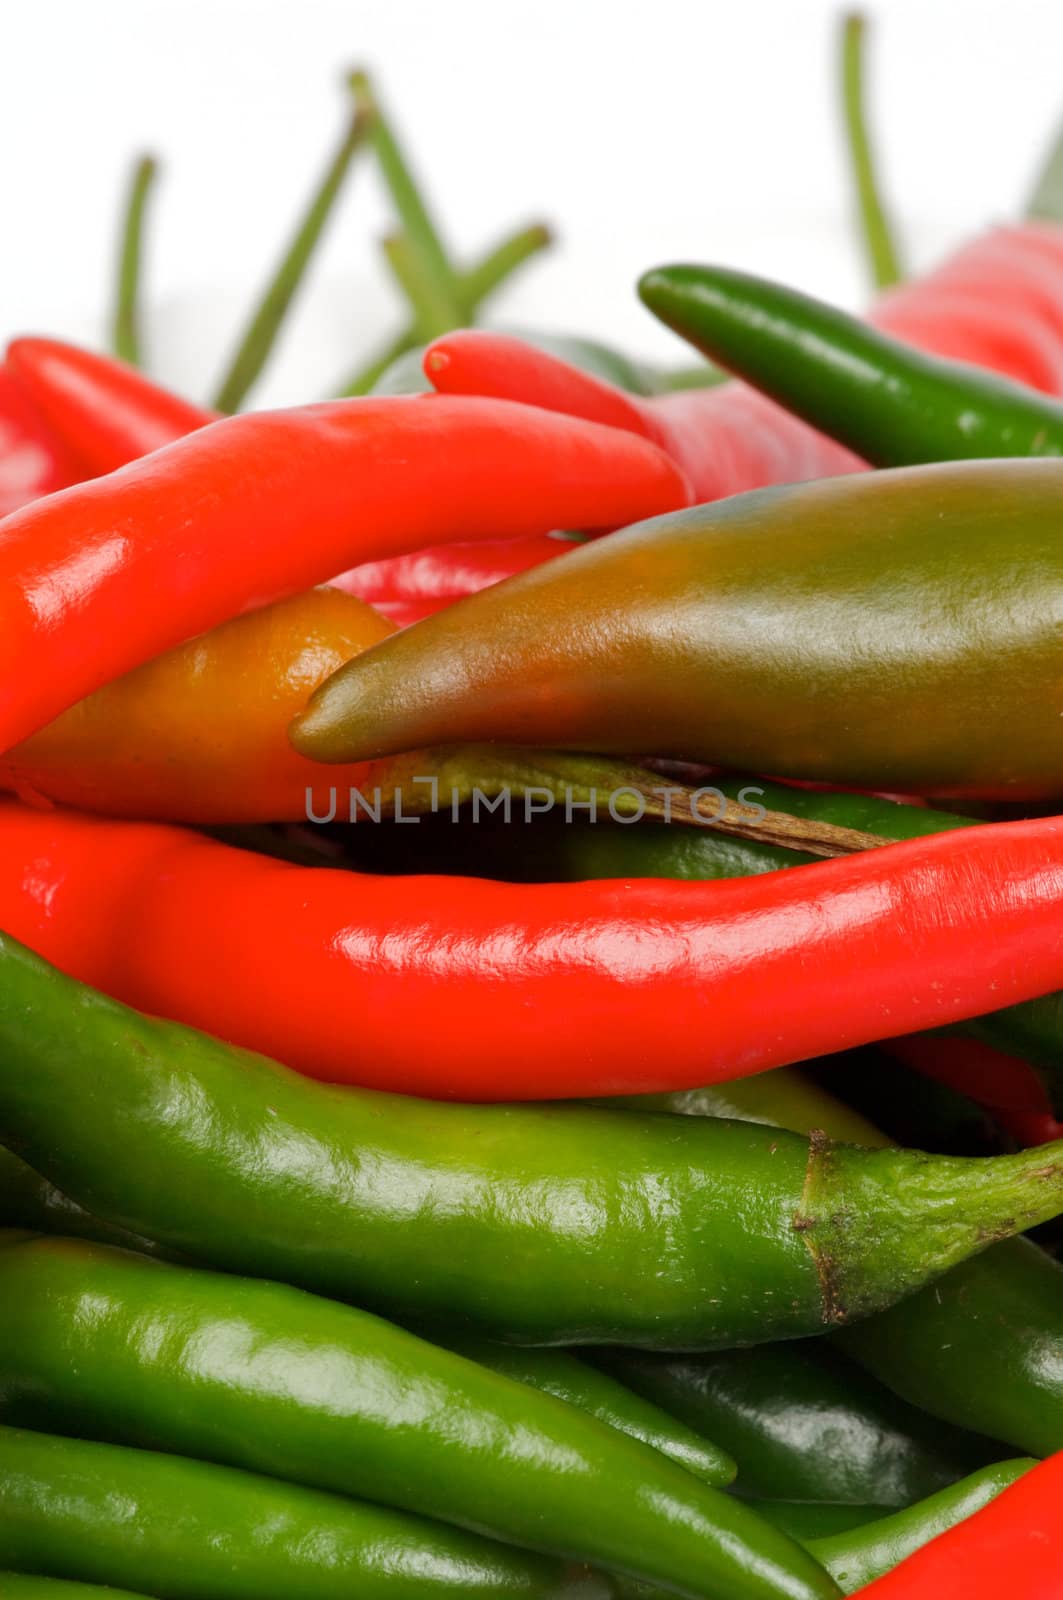 Arrangement of Chili peppers by zhekos